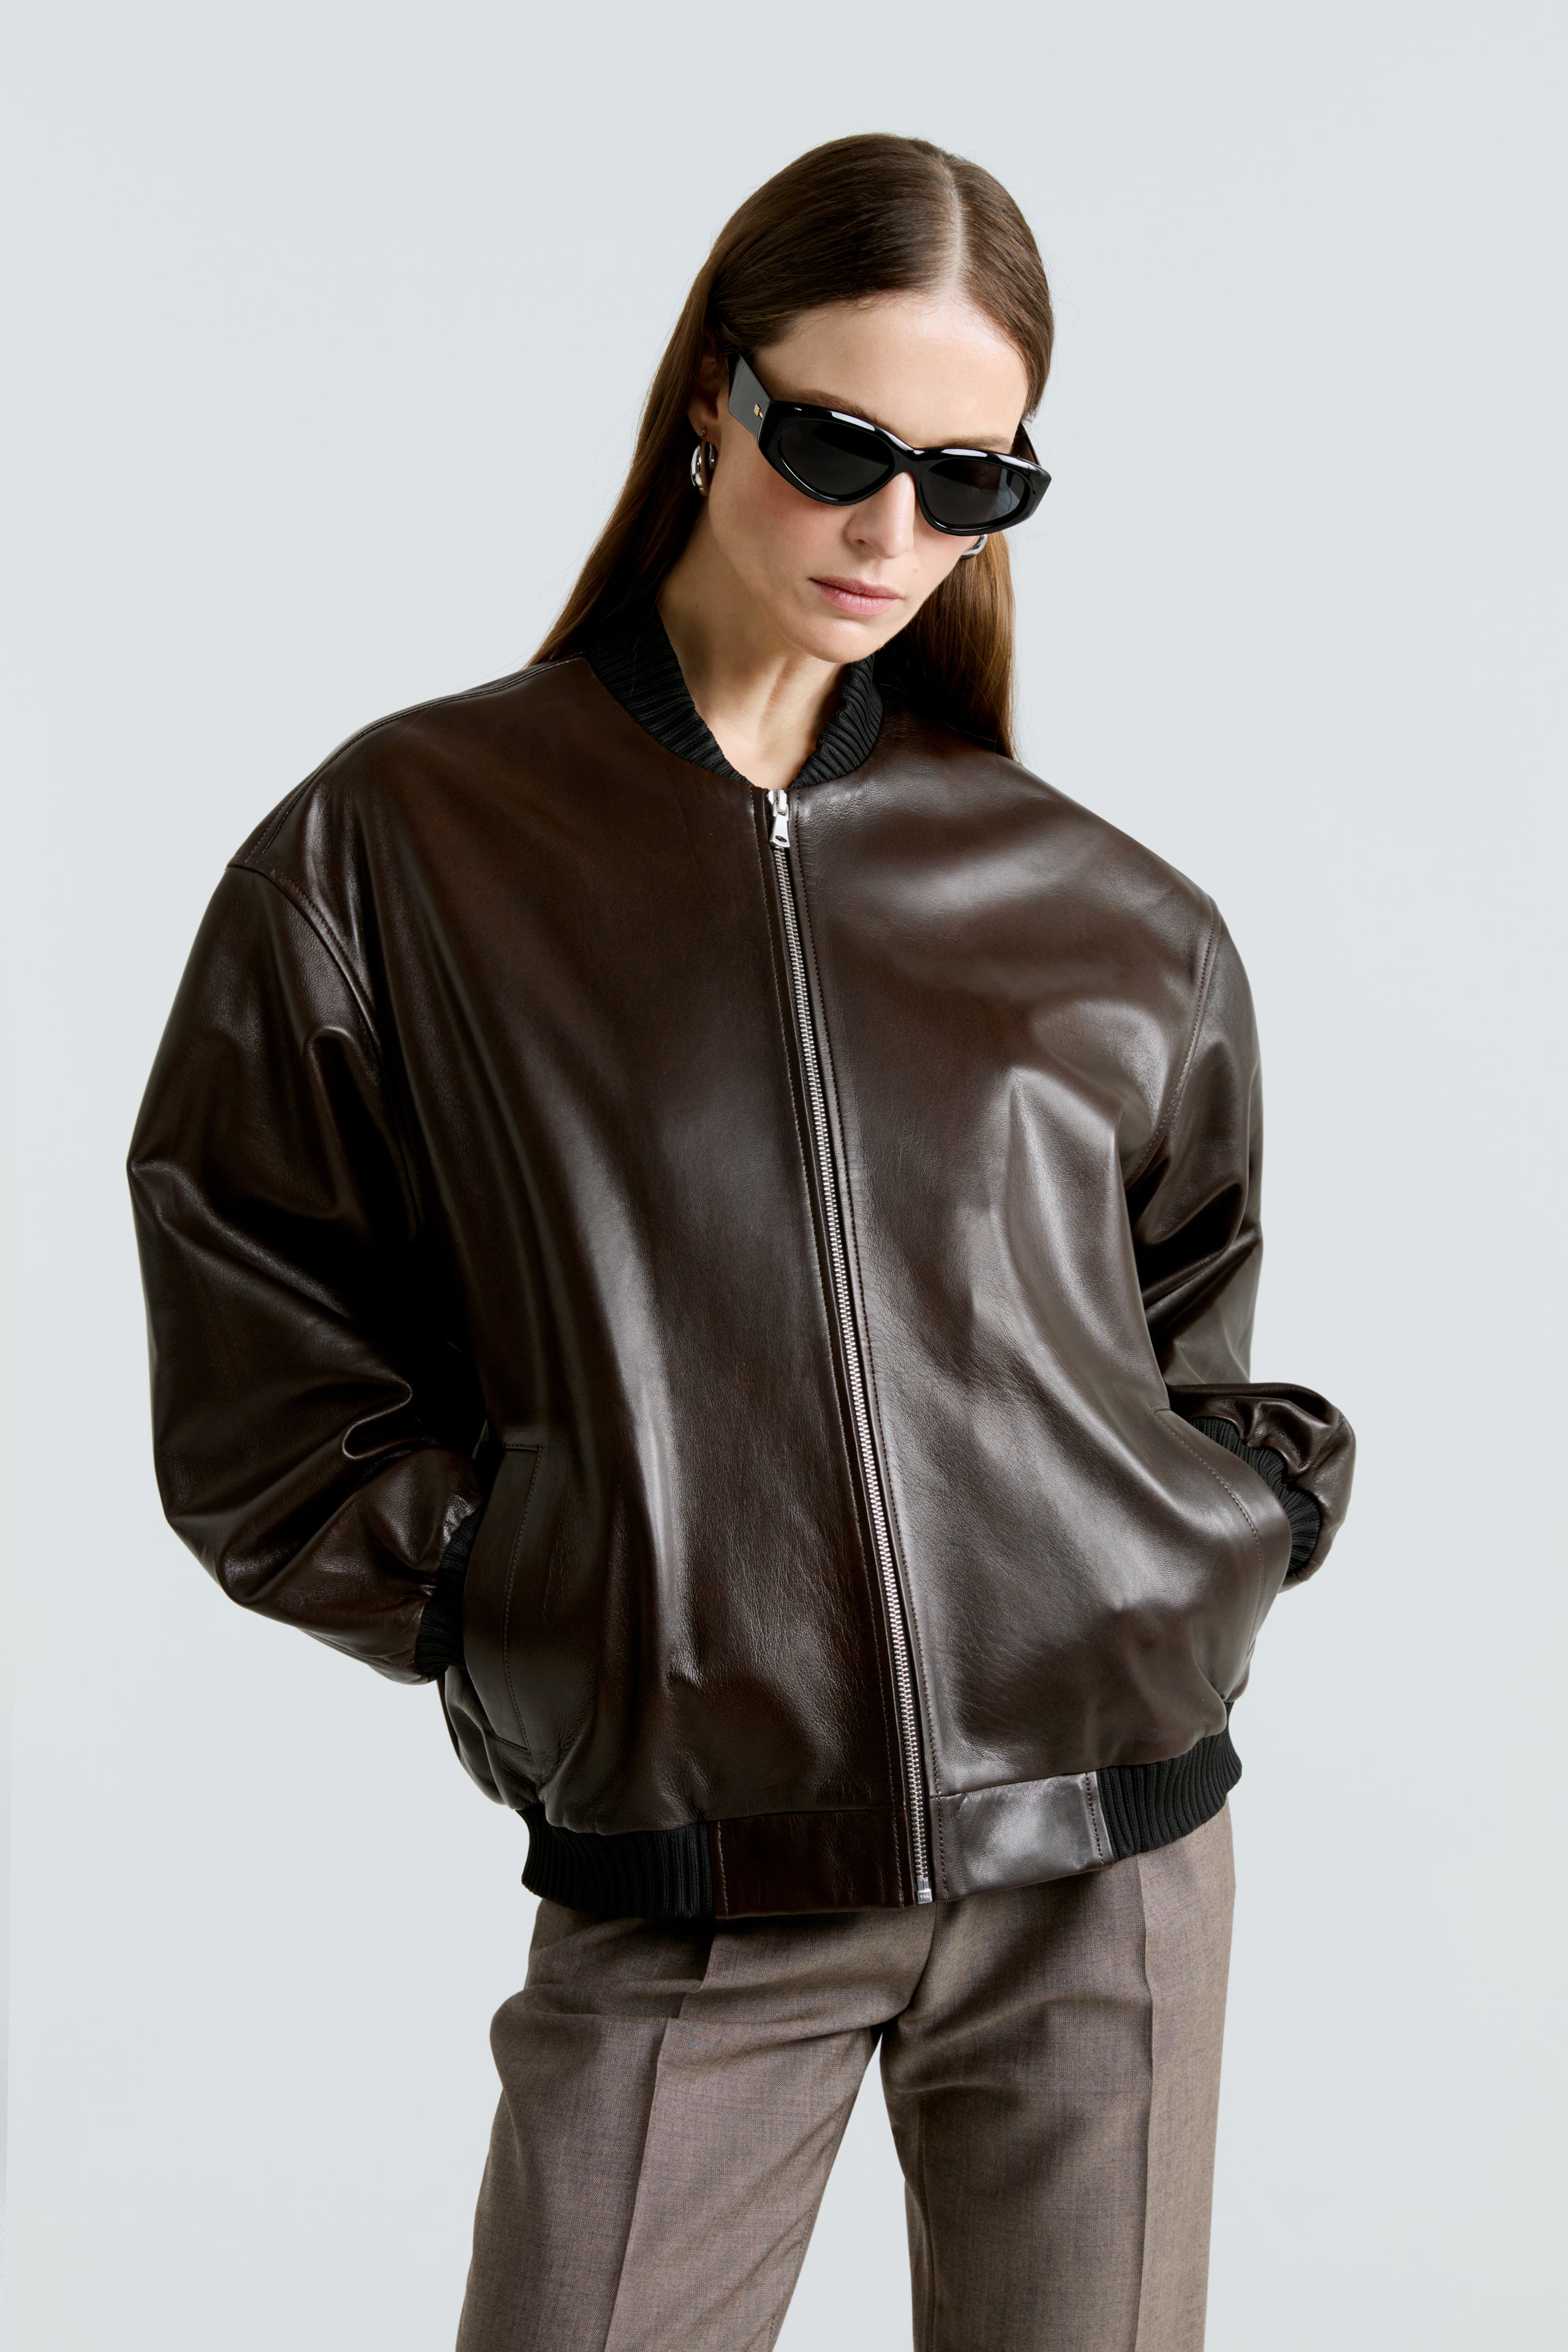 Model is wearing the Marly Syrup Leather Bomber Close Up